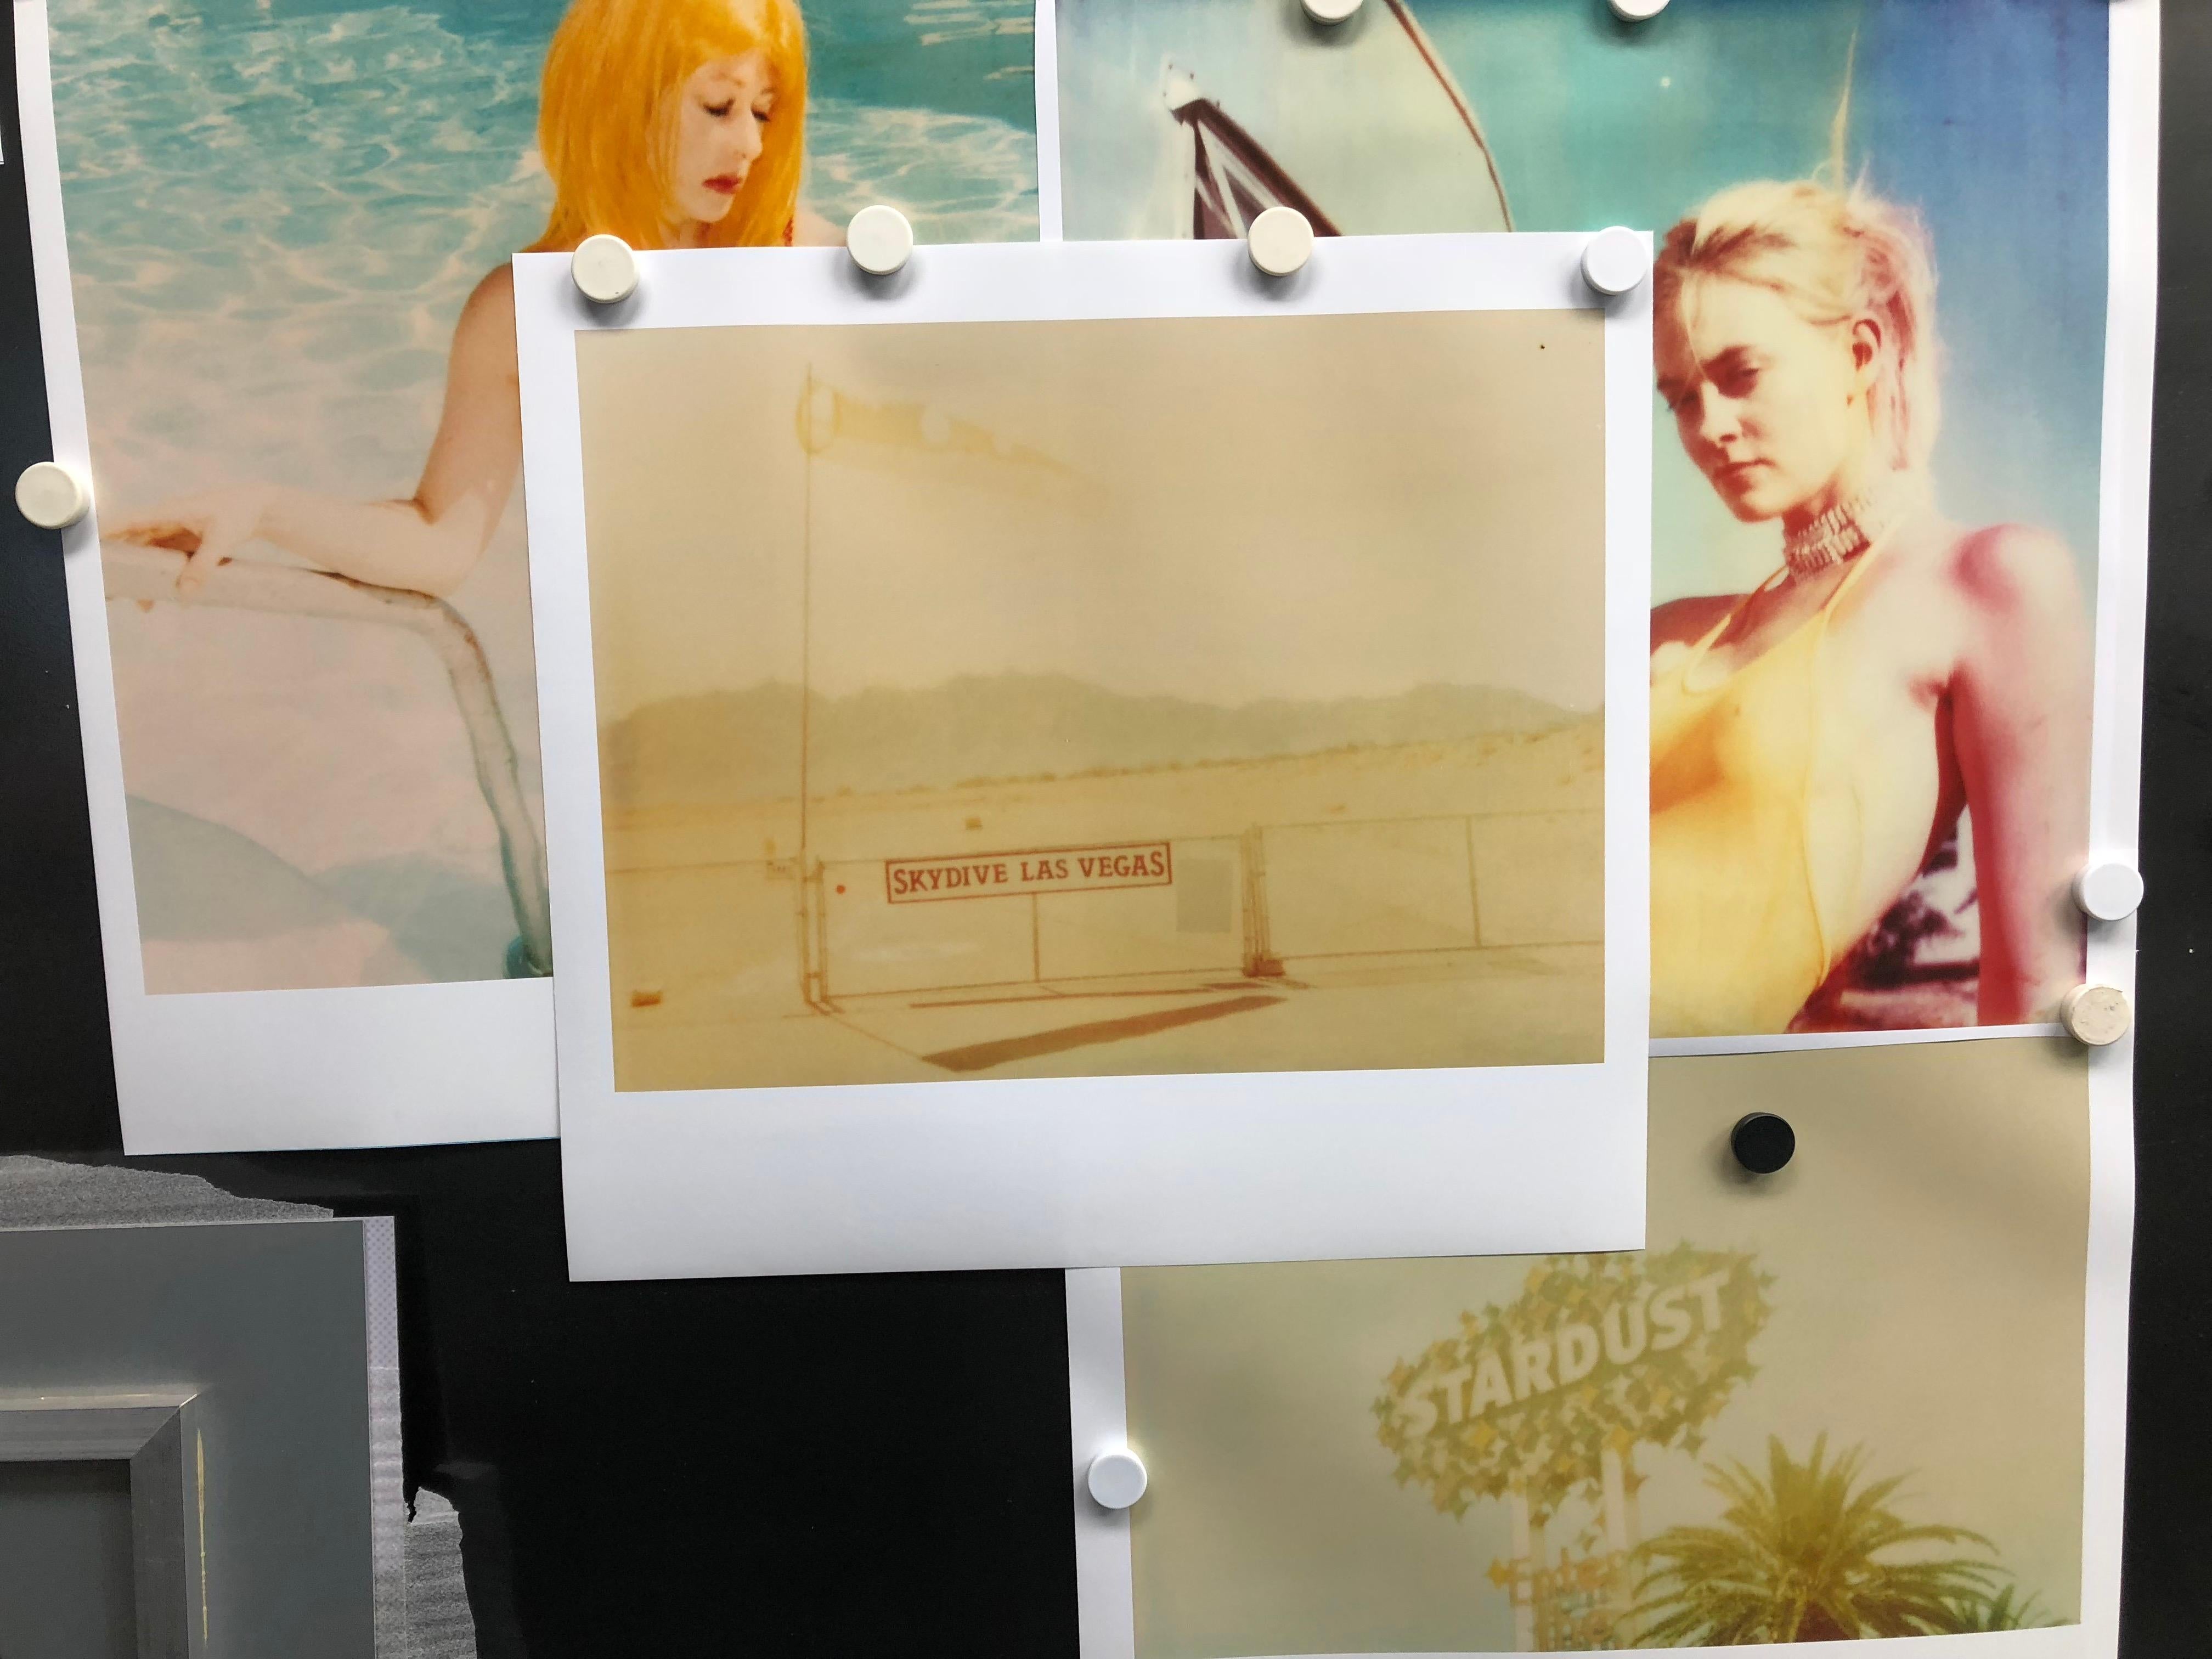 'Skydive' (Las Vegas) - 1999

50x60cm, Edition 6/10, 
analog C-Print, hand-printed and enlarged by the artist, based on a Polaroid.
Certificate and Signature label, artist Inventory Nr. 541.06, 
Not mounted.

THE GREATER THE EMPTINESS THE GRANDER